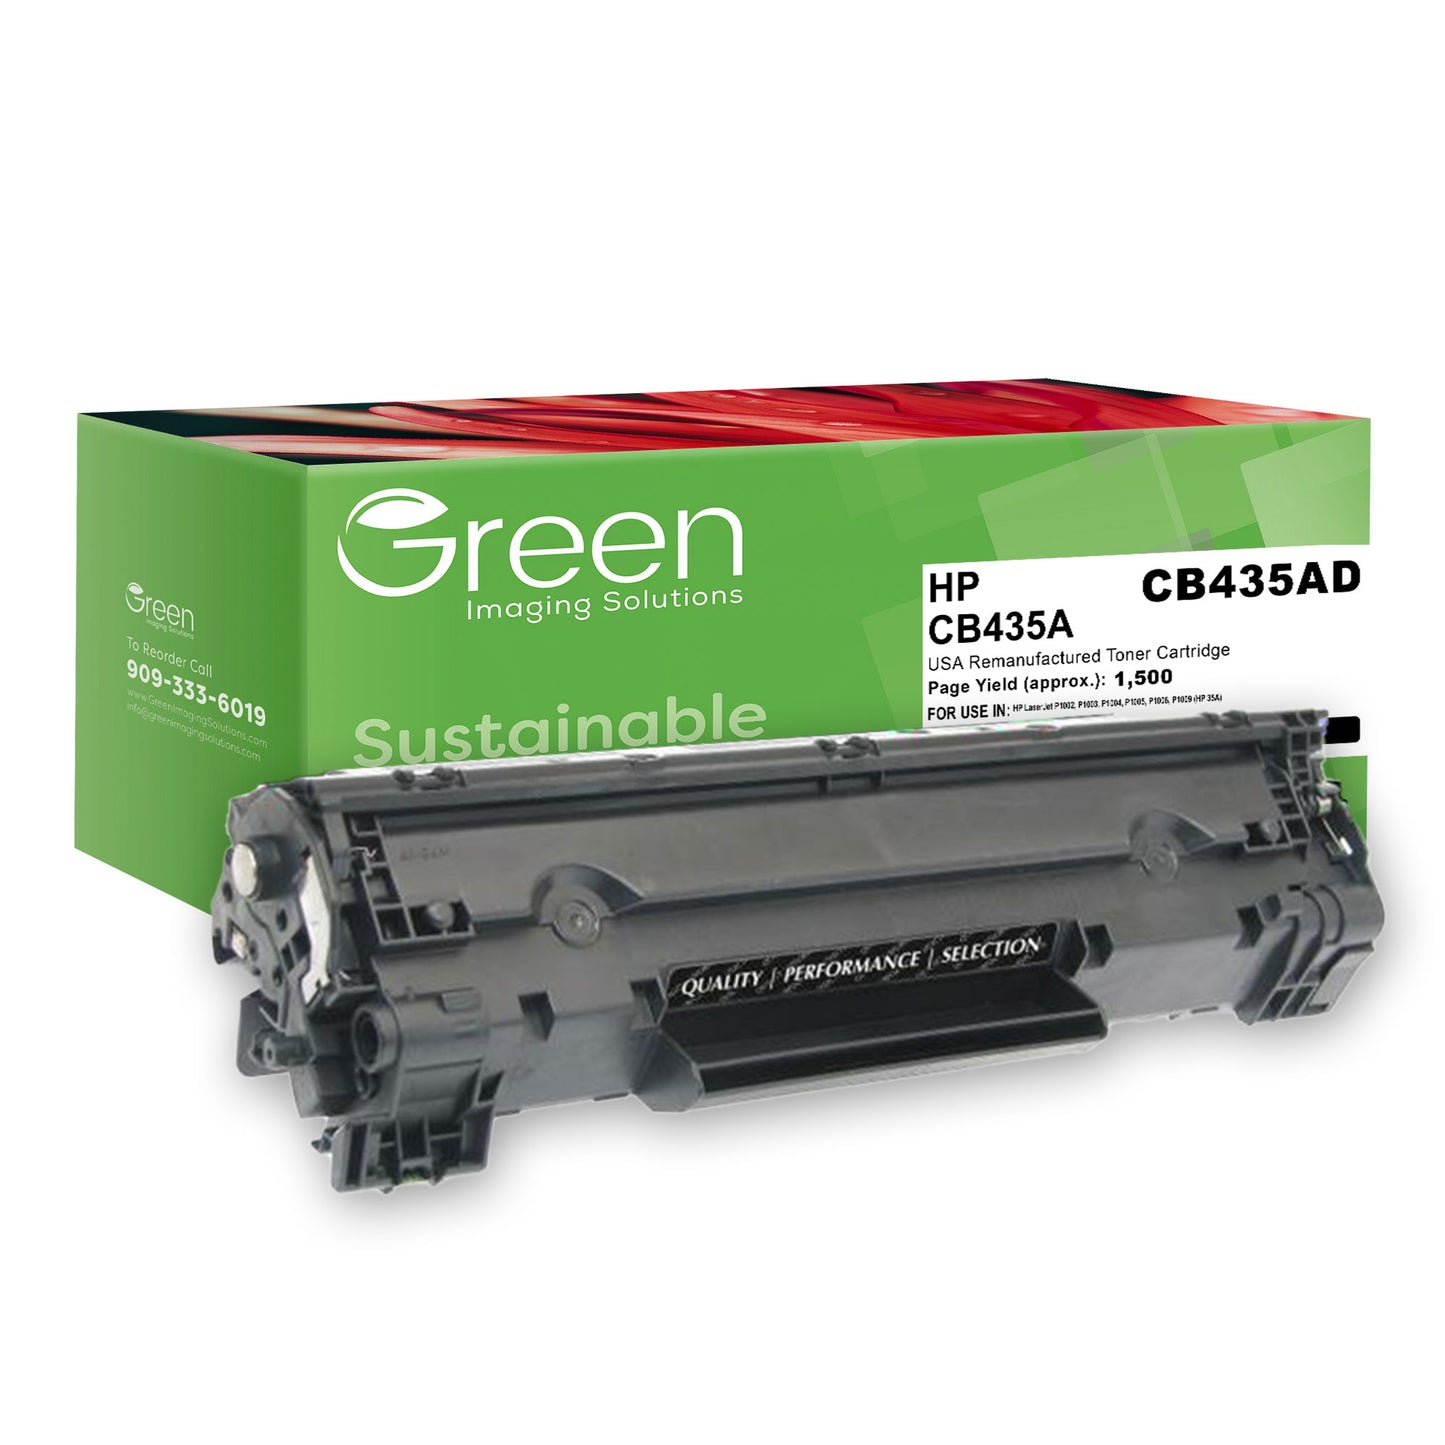 GIS USA Remanufactured Toner Cartridge for HP CB435A (HP 35A)